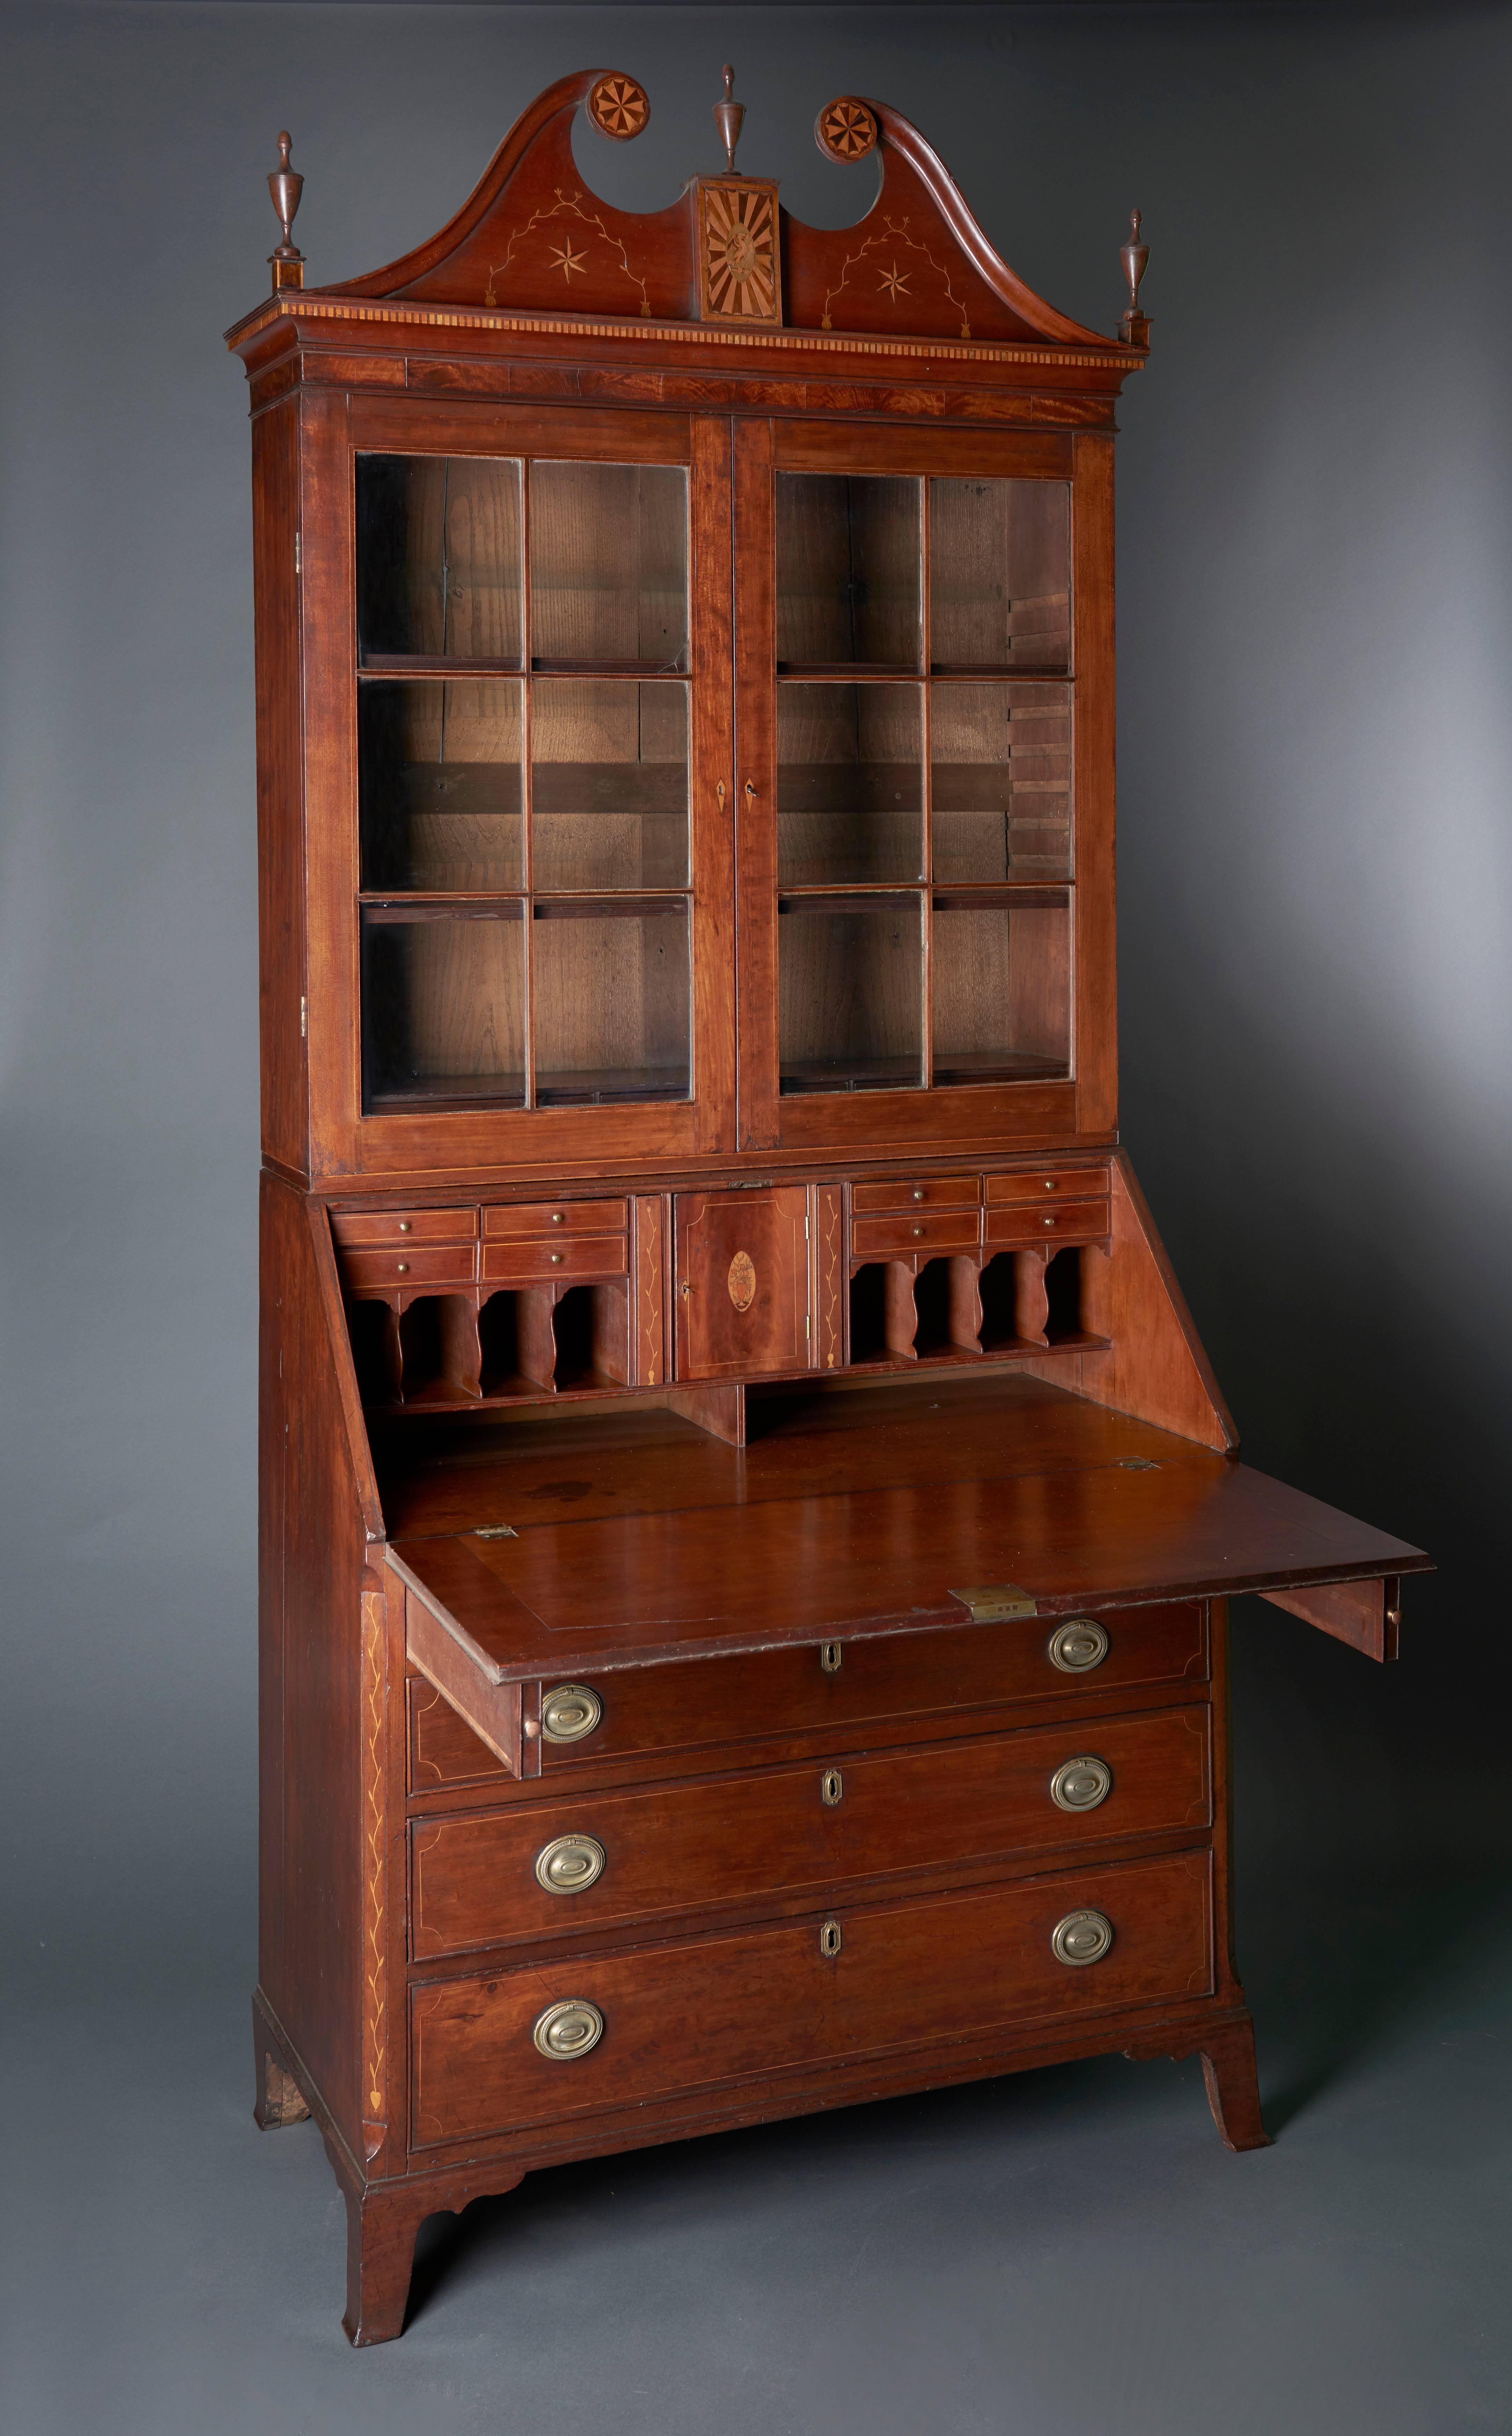 This commanding desk of mellowed cherry is a fine example of Federal era cabinetmaking in the Ohio River Valley. Cherry and cherry veneers were a favored wood in the region as was the use of light and dark wood inlays. The eagle holding the liberty